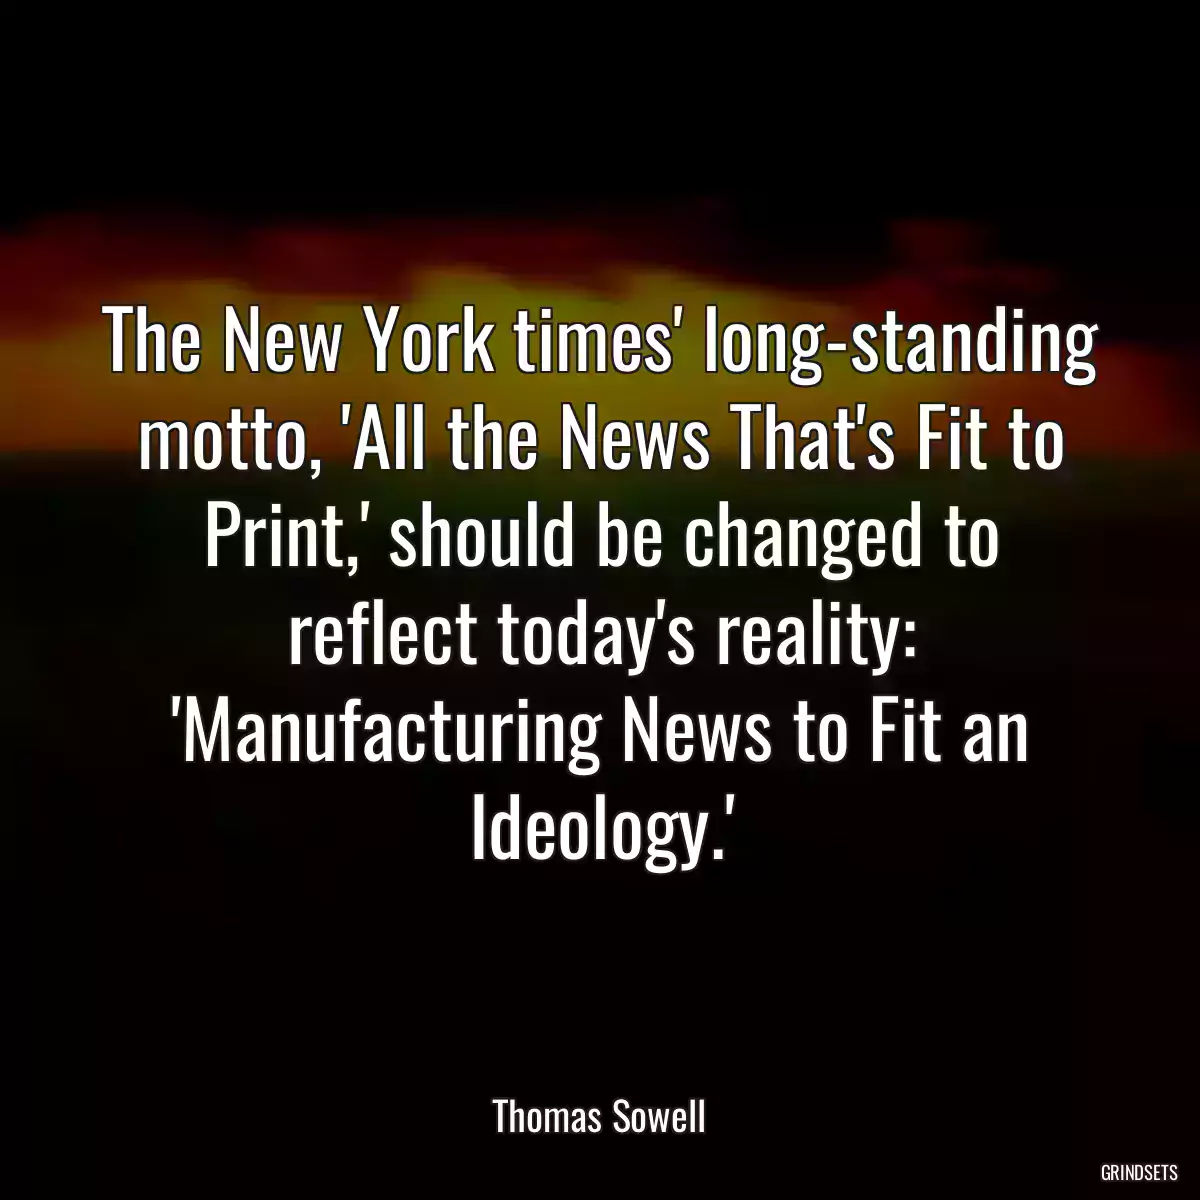 The New York times\' long-standing motto, \'All the News That\'s Fit to Print,\' should be changed to reflect today\'s reality: \'Manufacturing News to Fit an Ideology.\'